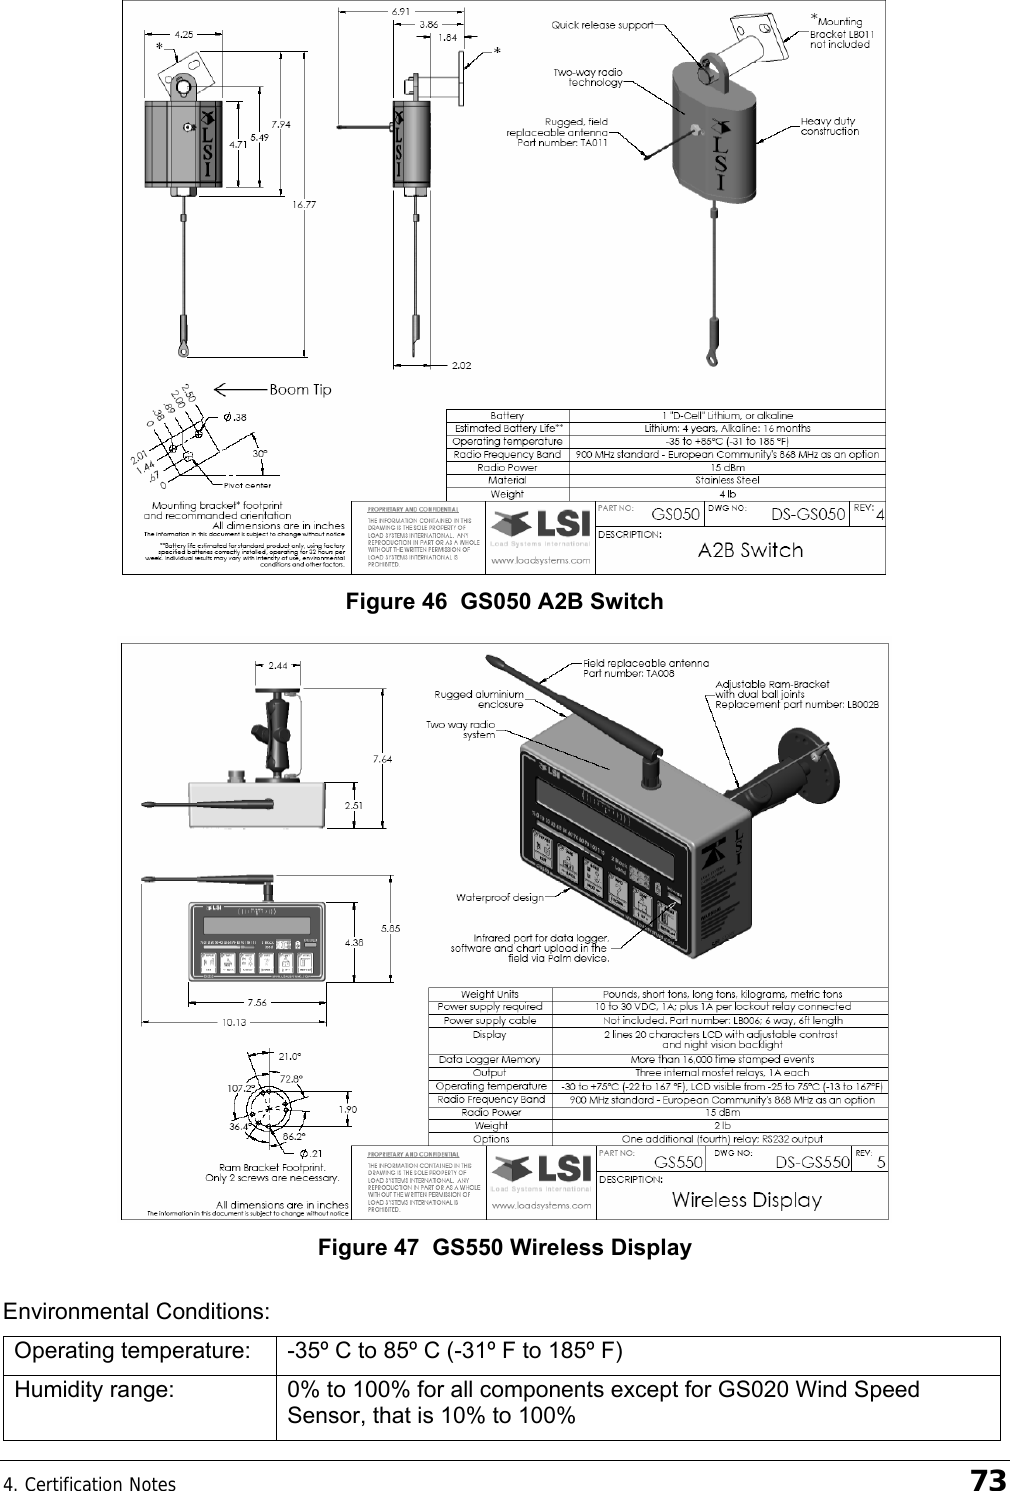 4. Certification Notes    73  Figure 46  GS050 A2B Switch  Figure 47  GS550 Wireless Display  Environmental Conditions: Operating temperature:  -35º C to 85º C (-31º F to 185º F) Humidity range:  0% to 100% for all components except for GS020 Wind Speed Sensor, that is 10% to 100% 